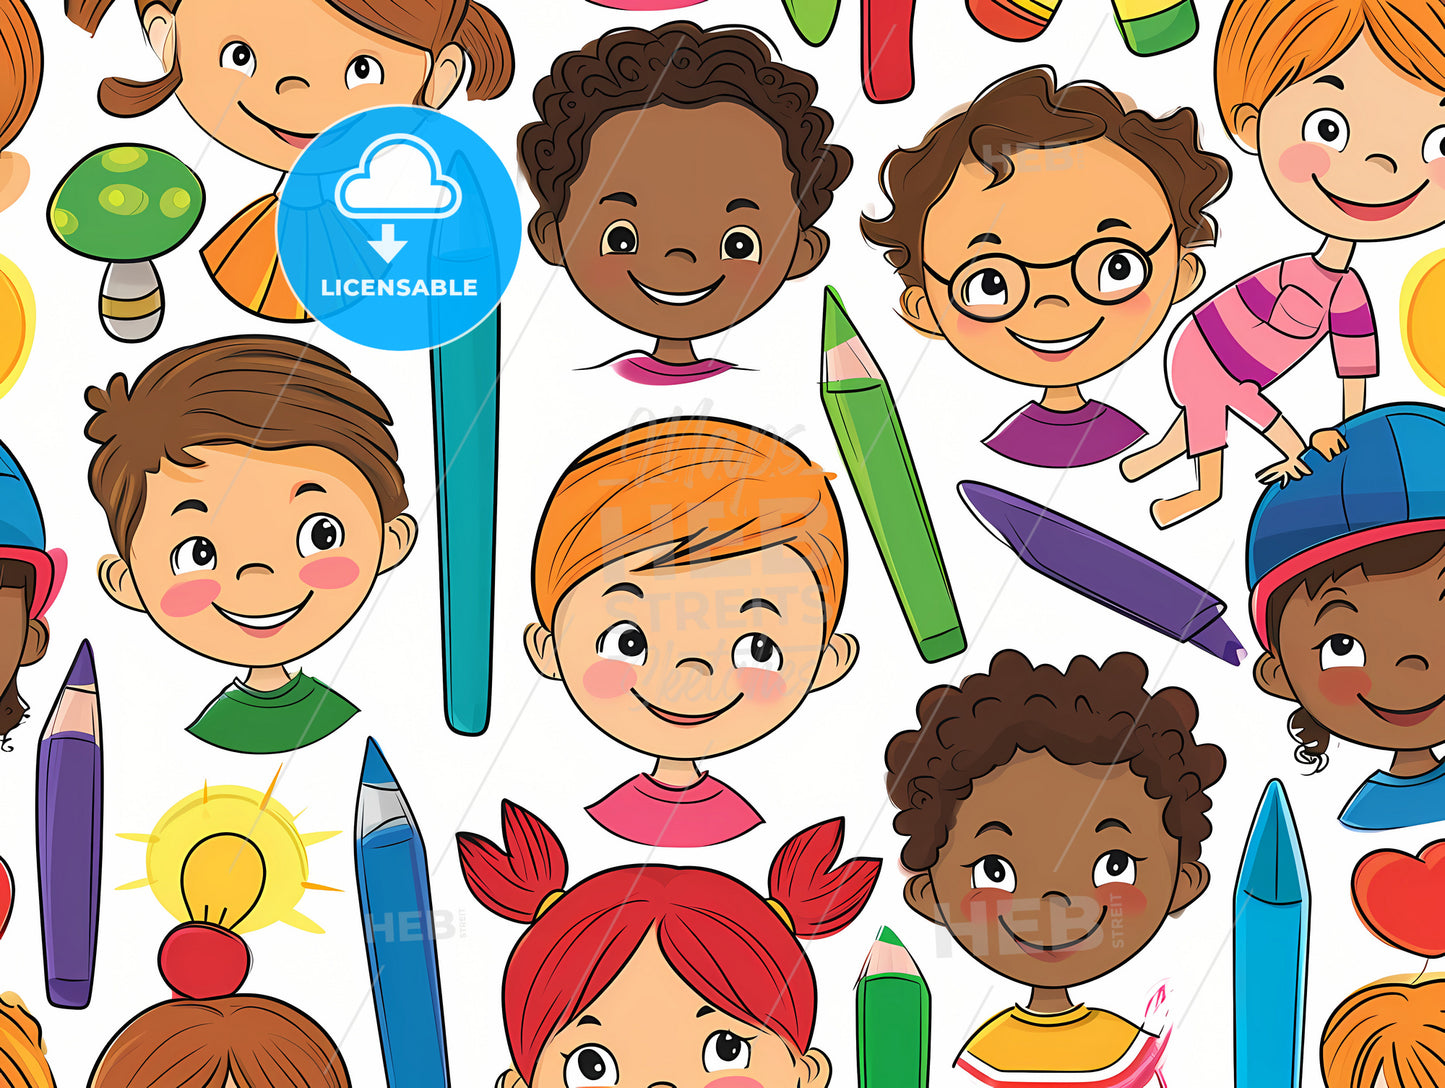 Simple And Relaxing Full Of Childrens Fun, A Seamless Pattern Of Children's Faces And Colored Pencils